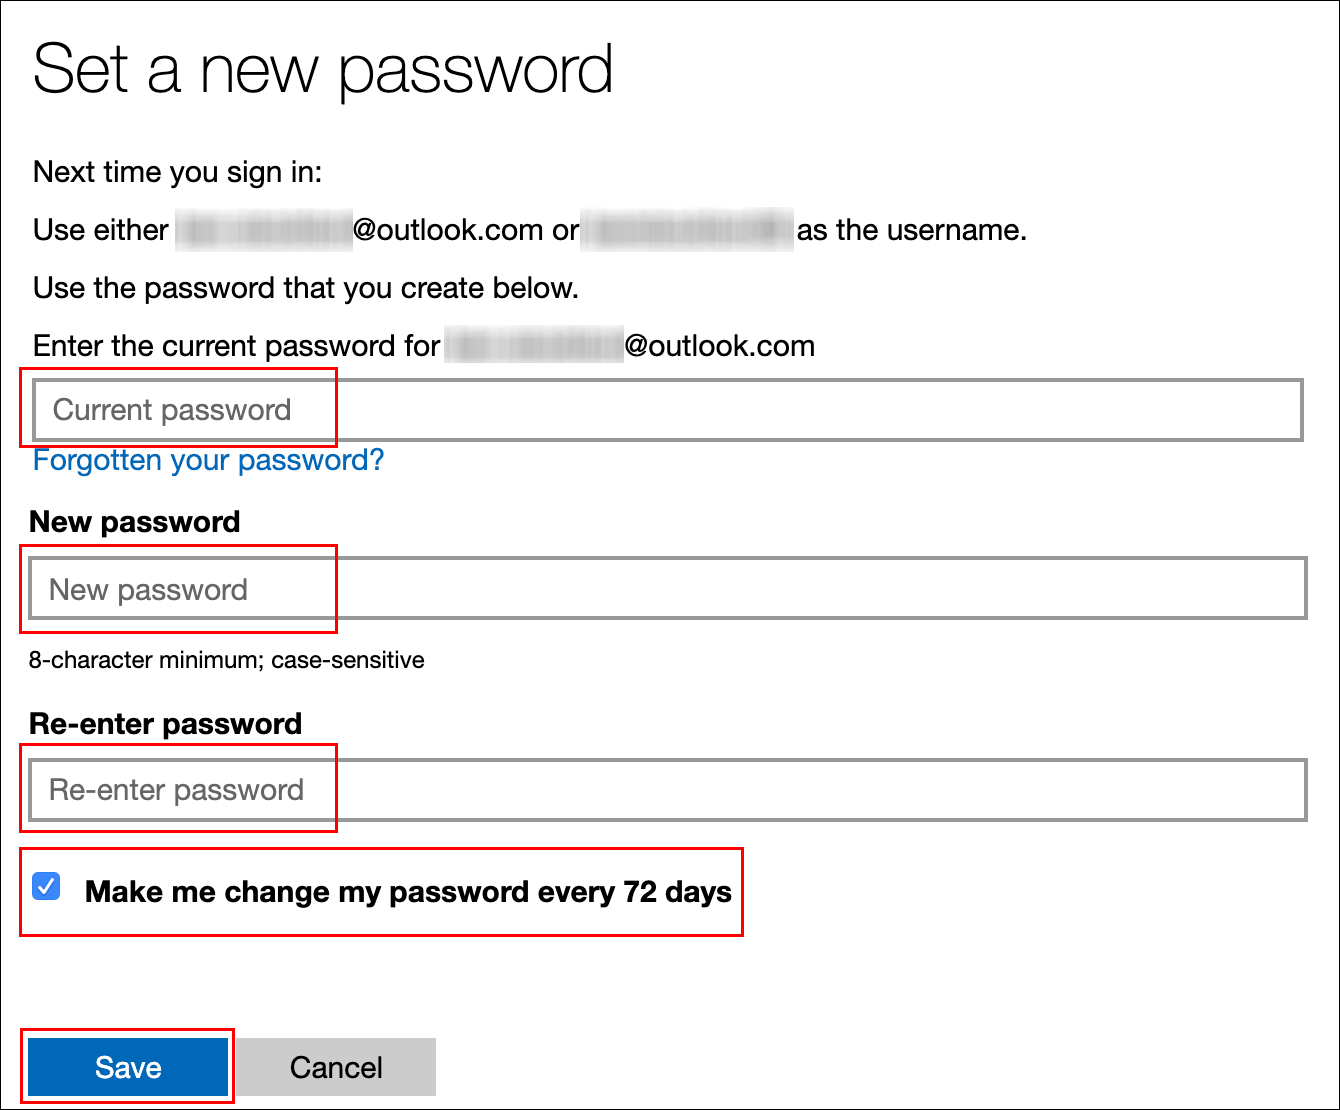 Type your current password, type a new password, click the checkbox next to Make Me Change My Password Every 72 Days, and then click Save.